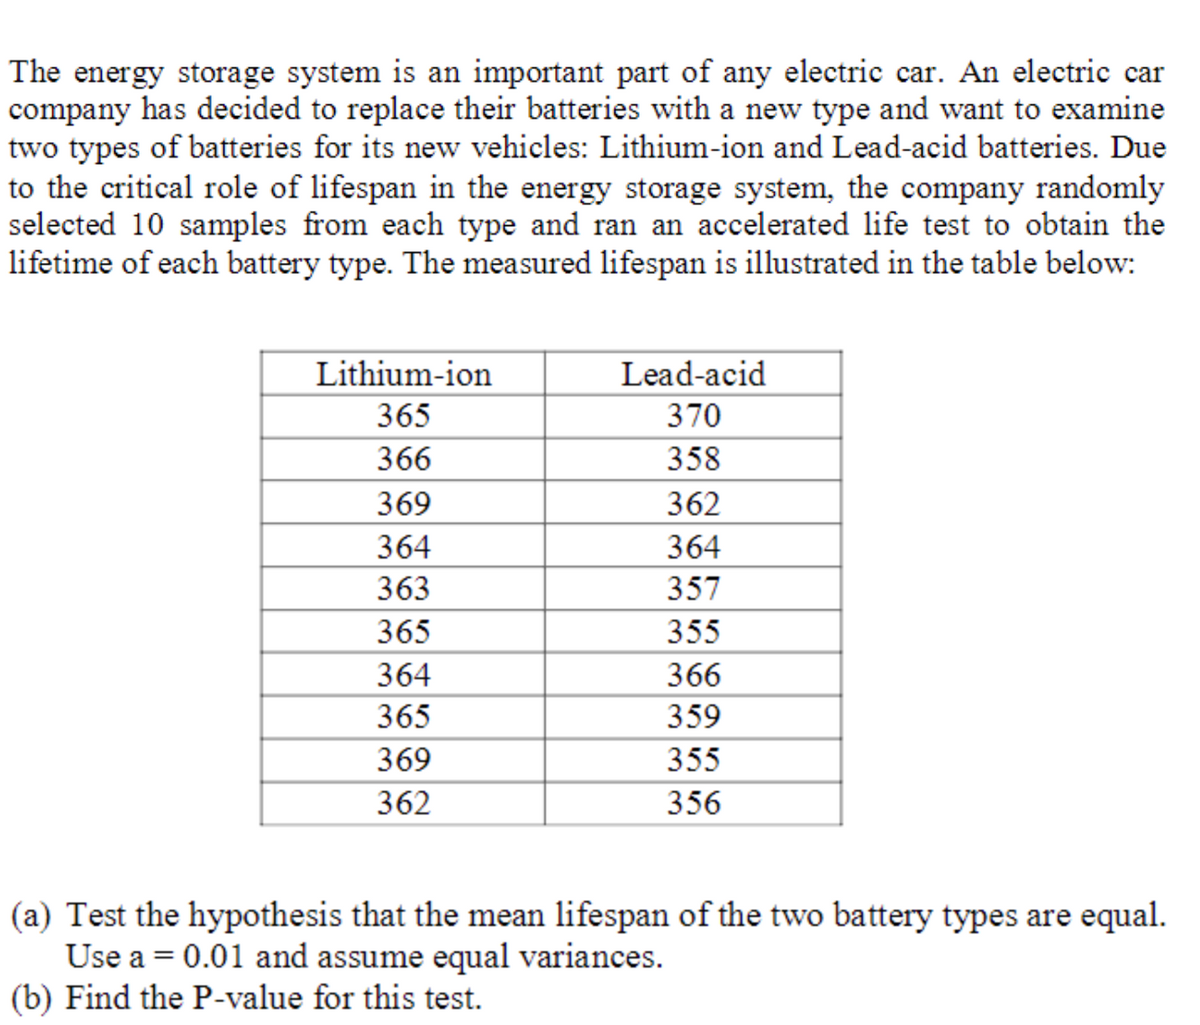 The energy storage system is an important part of any electric car. An electric car
company has decided to replace their batteries with a new type and want to examine
two types of batteries for its new vehicles: Lithium-ion and Lead-acid batteries. Due
to the critical role of lifespan in the energy storage system, the company randomly
selected 10 samples from each type and ran an accelerated life test to obtain the
lifetime of each battery type. The measured lifespan is illustrated in the table below:
Lithium-ion
Lead-acid
365
370
366
358
369
362
364
364
363
357
365
355
364
366
365
359
369
355
362
356
(a) Test the hypothesis that the mean lifespan of the two battery types are equal.
Use a = 0.01 and assume equal variances.
(b) Find the P-value for this test.
